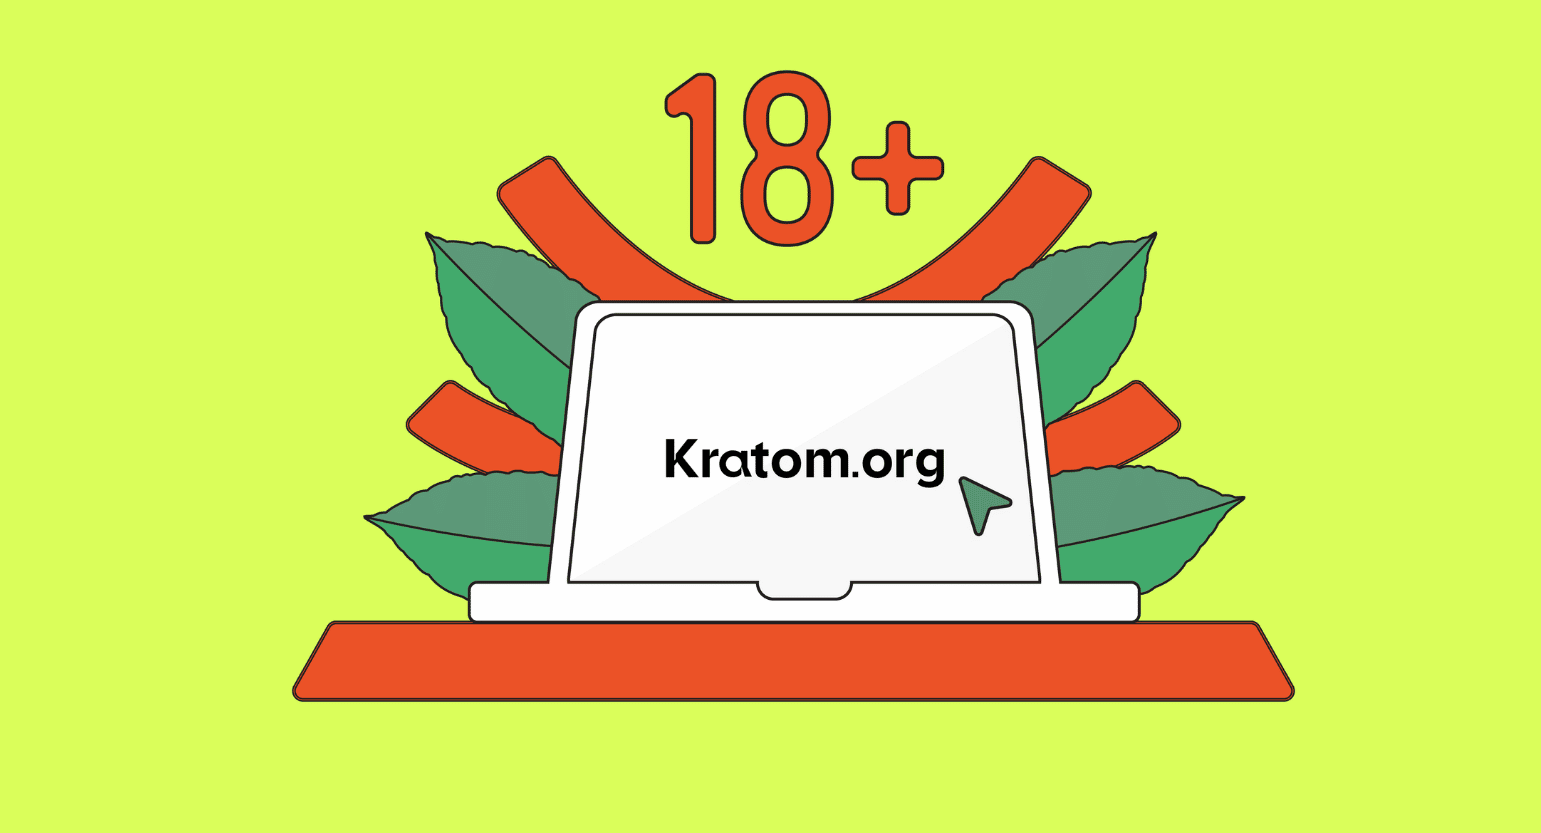 How Old Do You Have to Be to Buy Kratom?